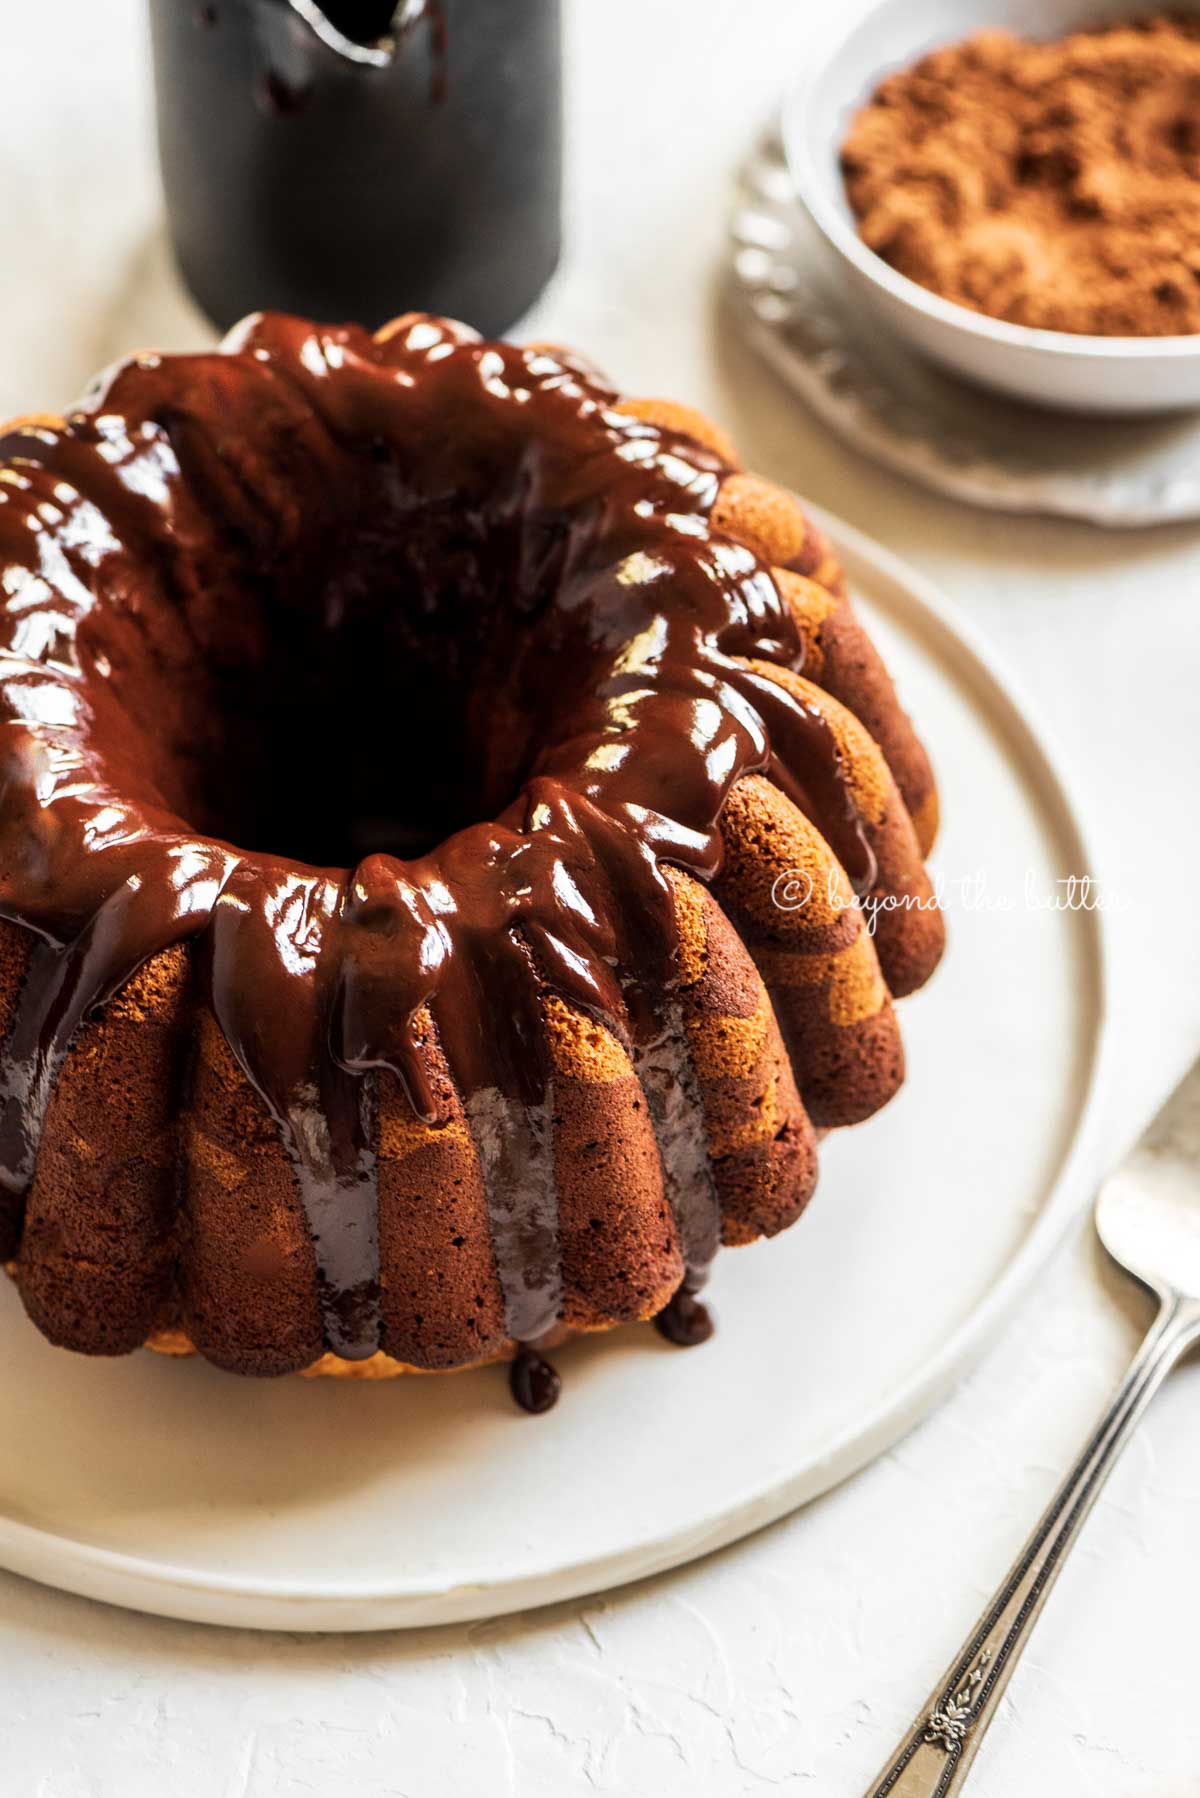 Angled image of chocolate glazed marble bundt cake on black and white cake platter, small bowl of cocoa, and 2 forks | All Images © Beyond the Butter™